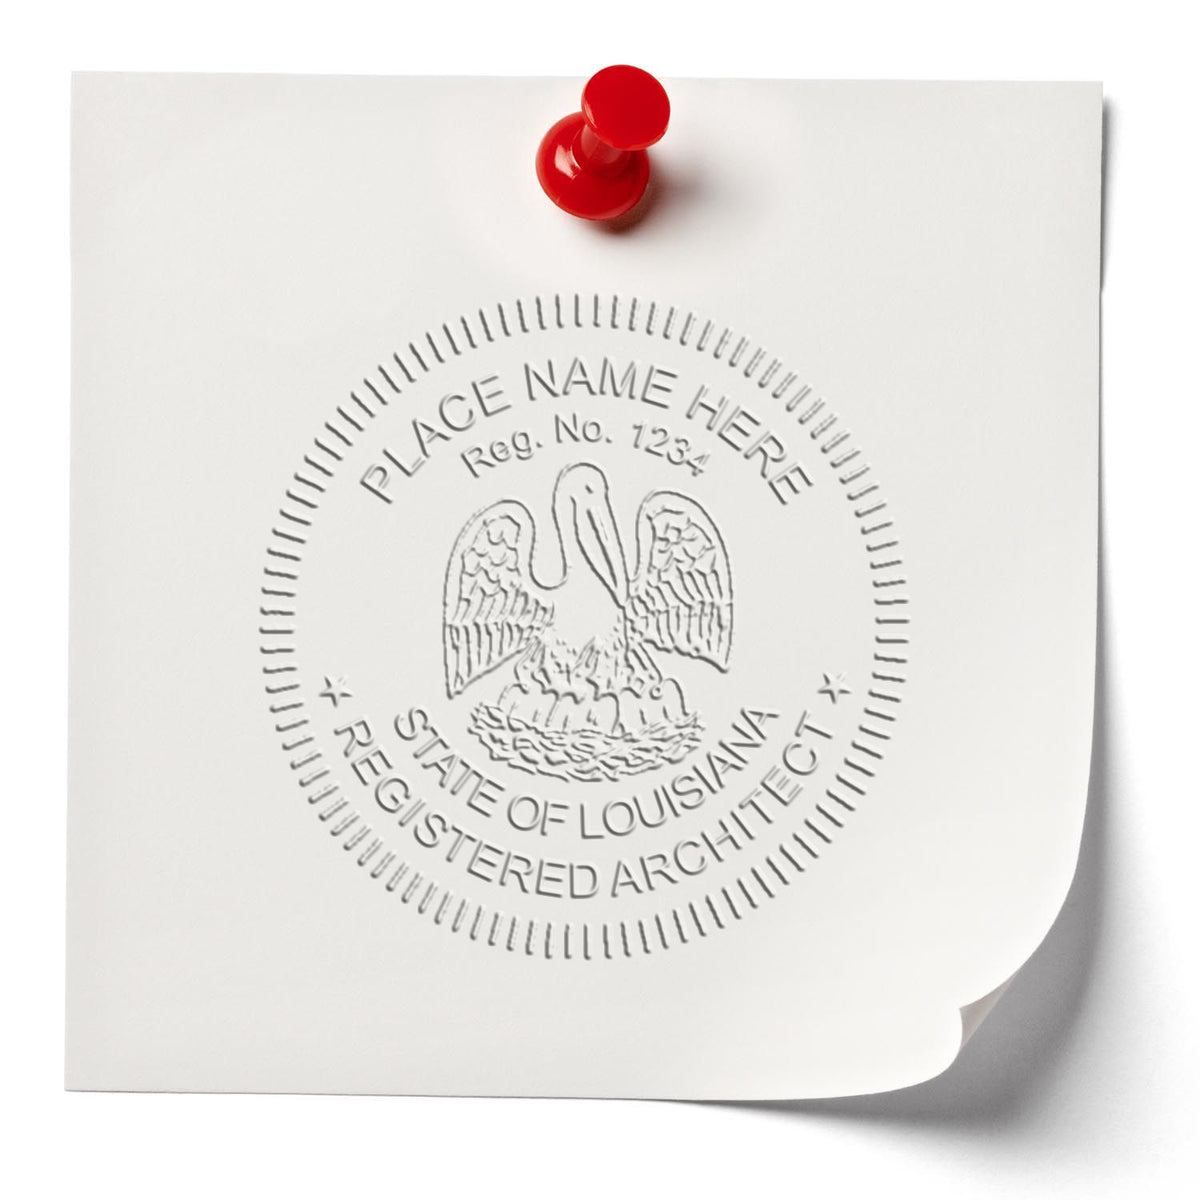 The Gift Louisiana Architect Seal stamp impression comes to life with a crisp, detailed image stamped on paper - showcasing true professional quality.